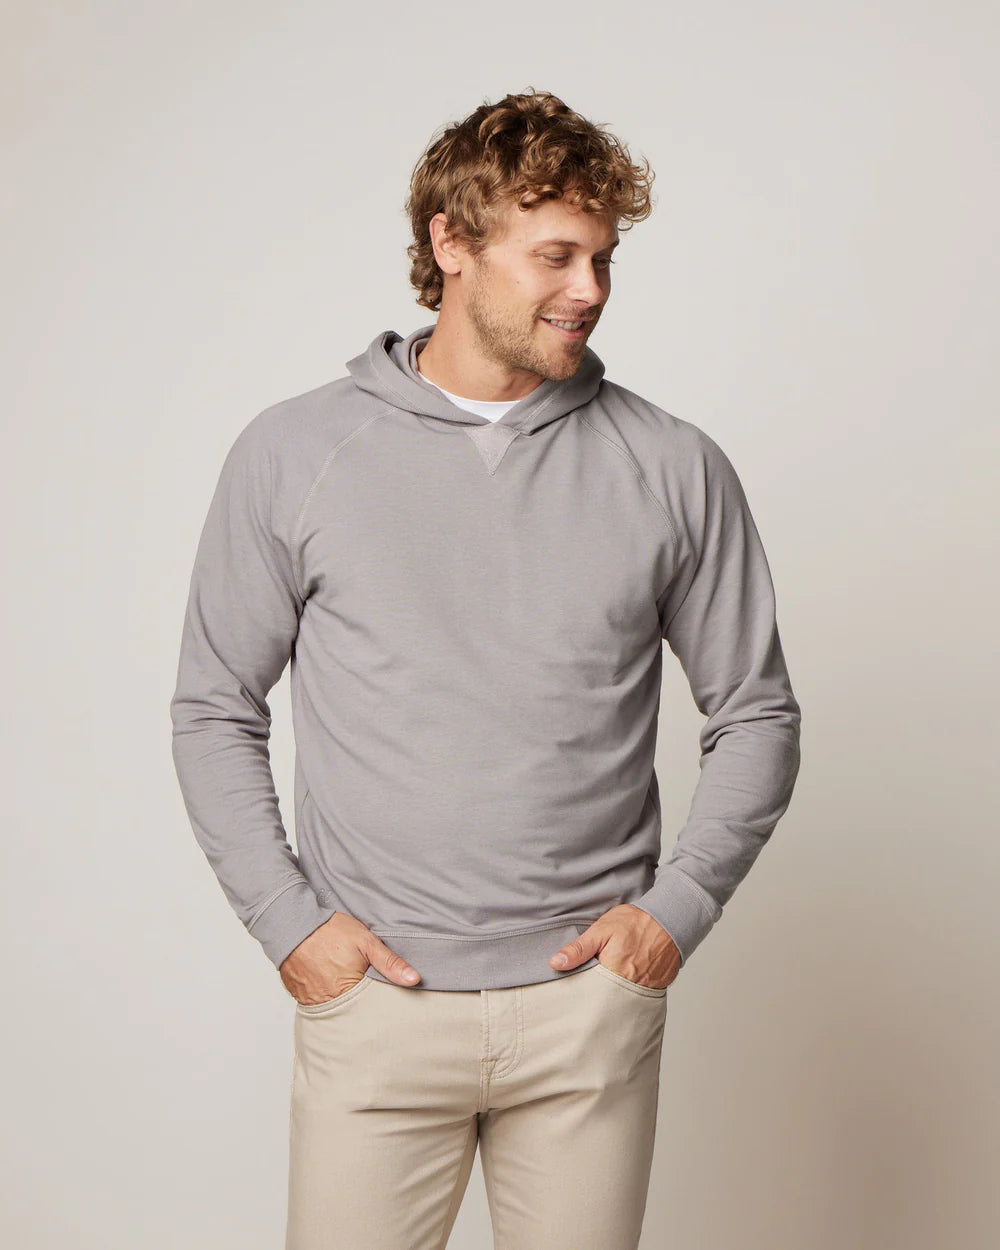 Every guy needs a go-to hoodie that they can grab for casual outings or a day around the house. Our Amos Hoodie is made of a premium fabric blend that gives you all the softness of cotton with the perfect hint of stretch.